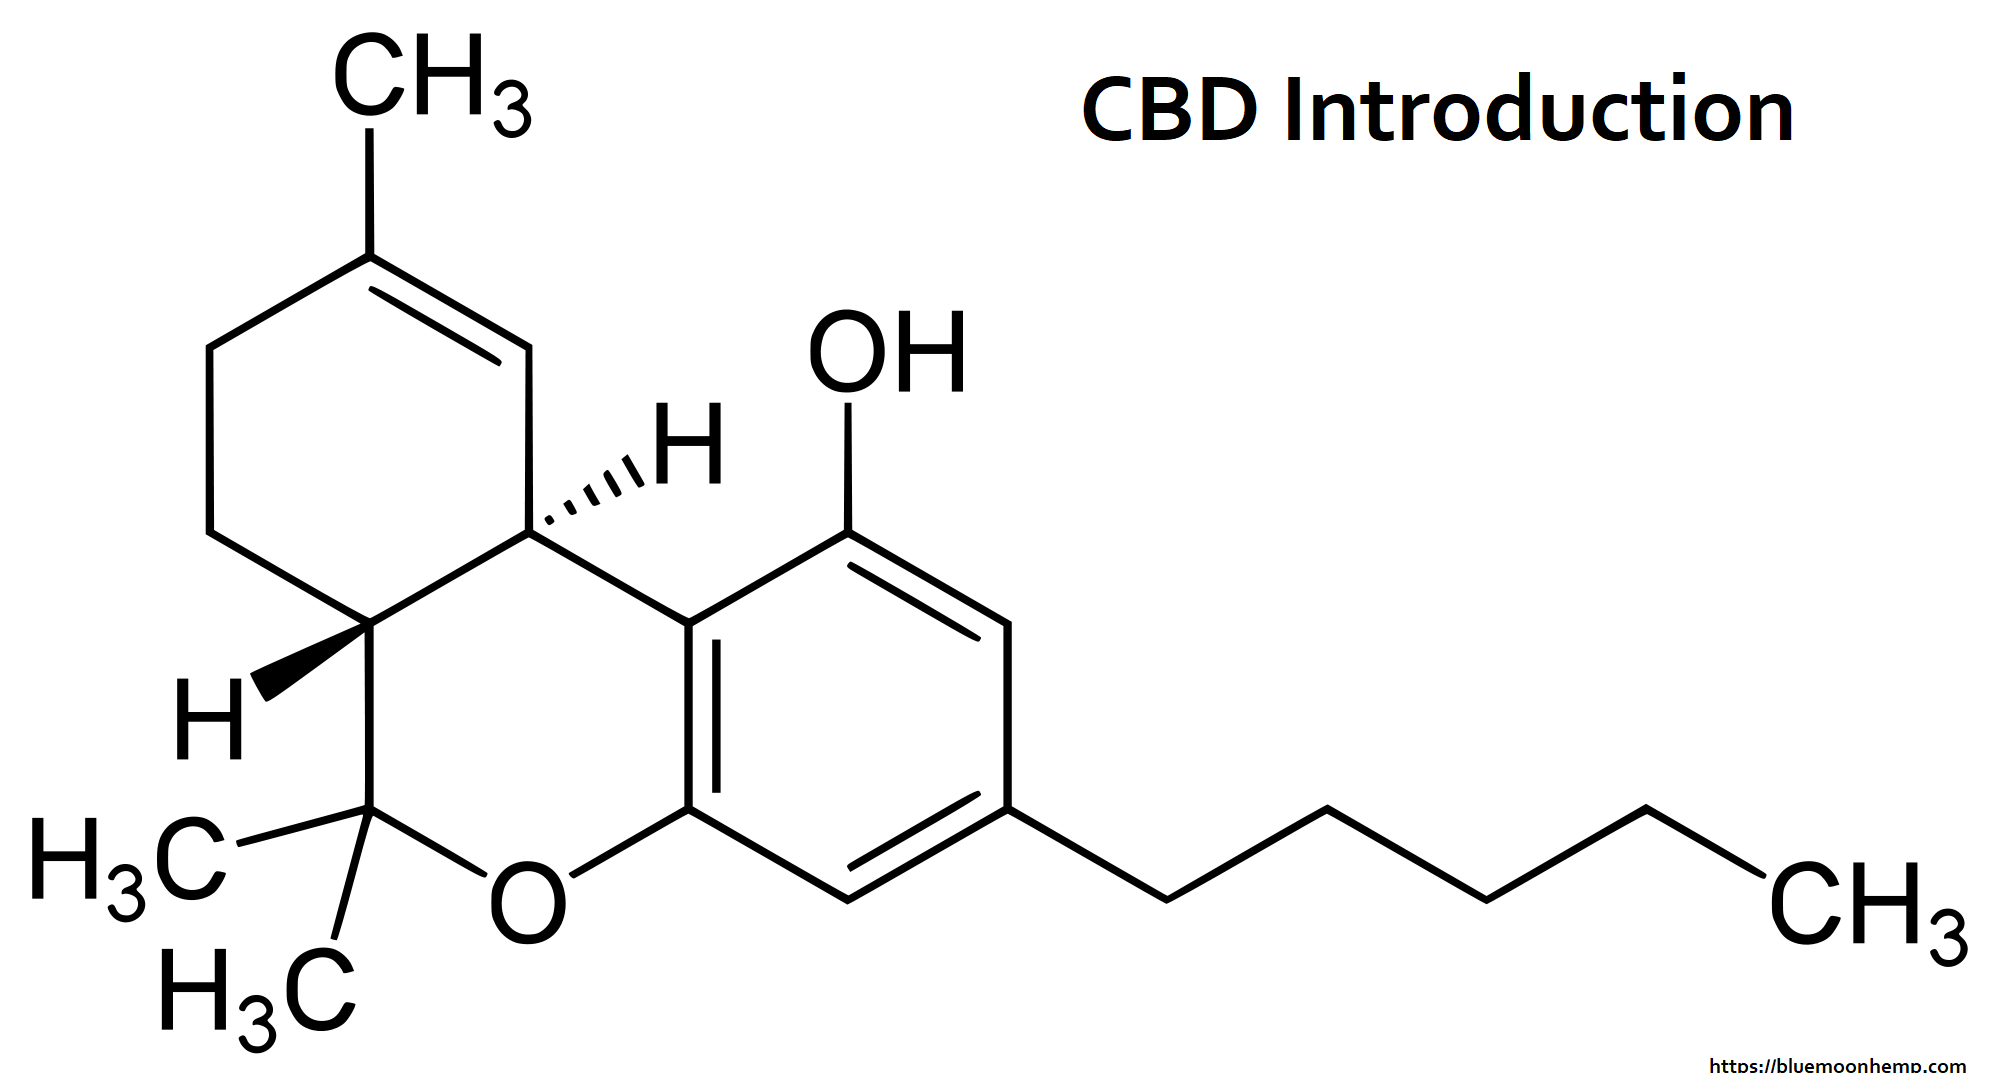 Everything You Wanted to Know About CBD and Were Afraid to Ask